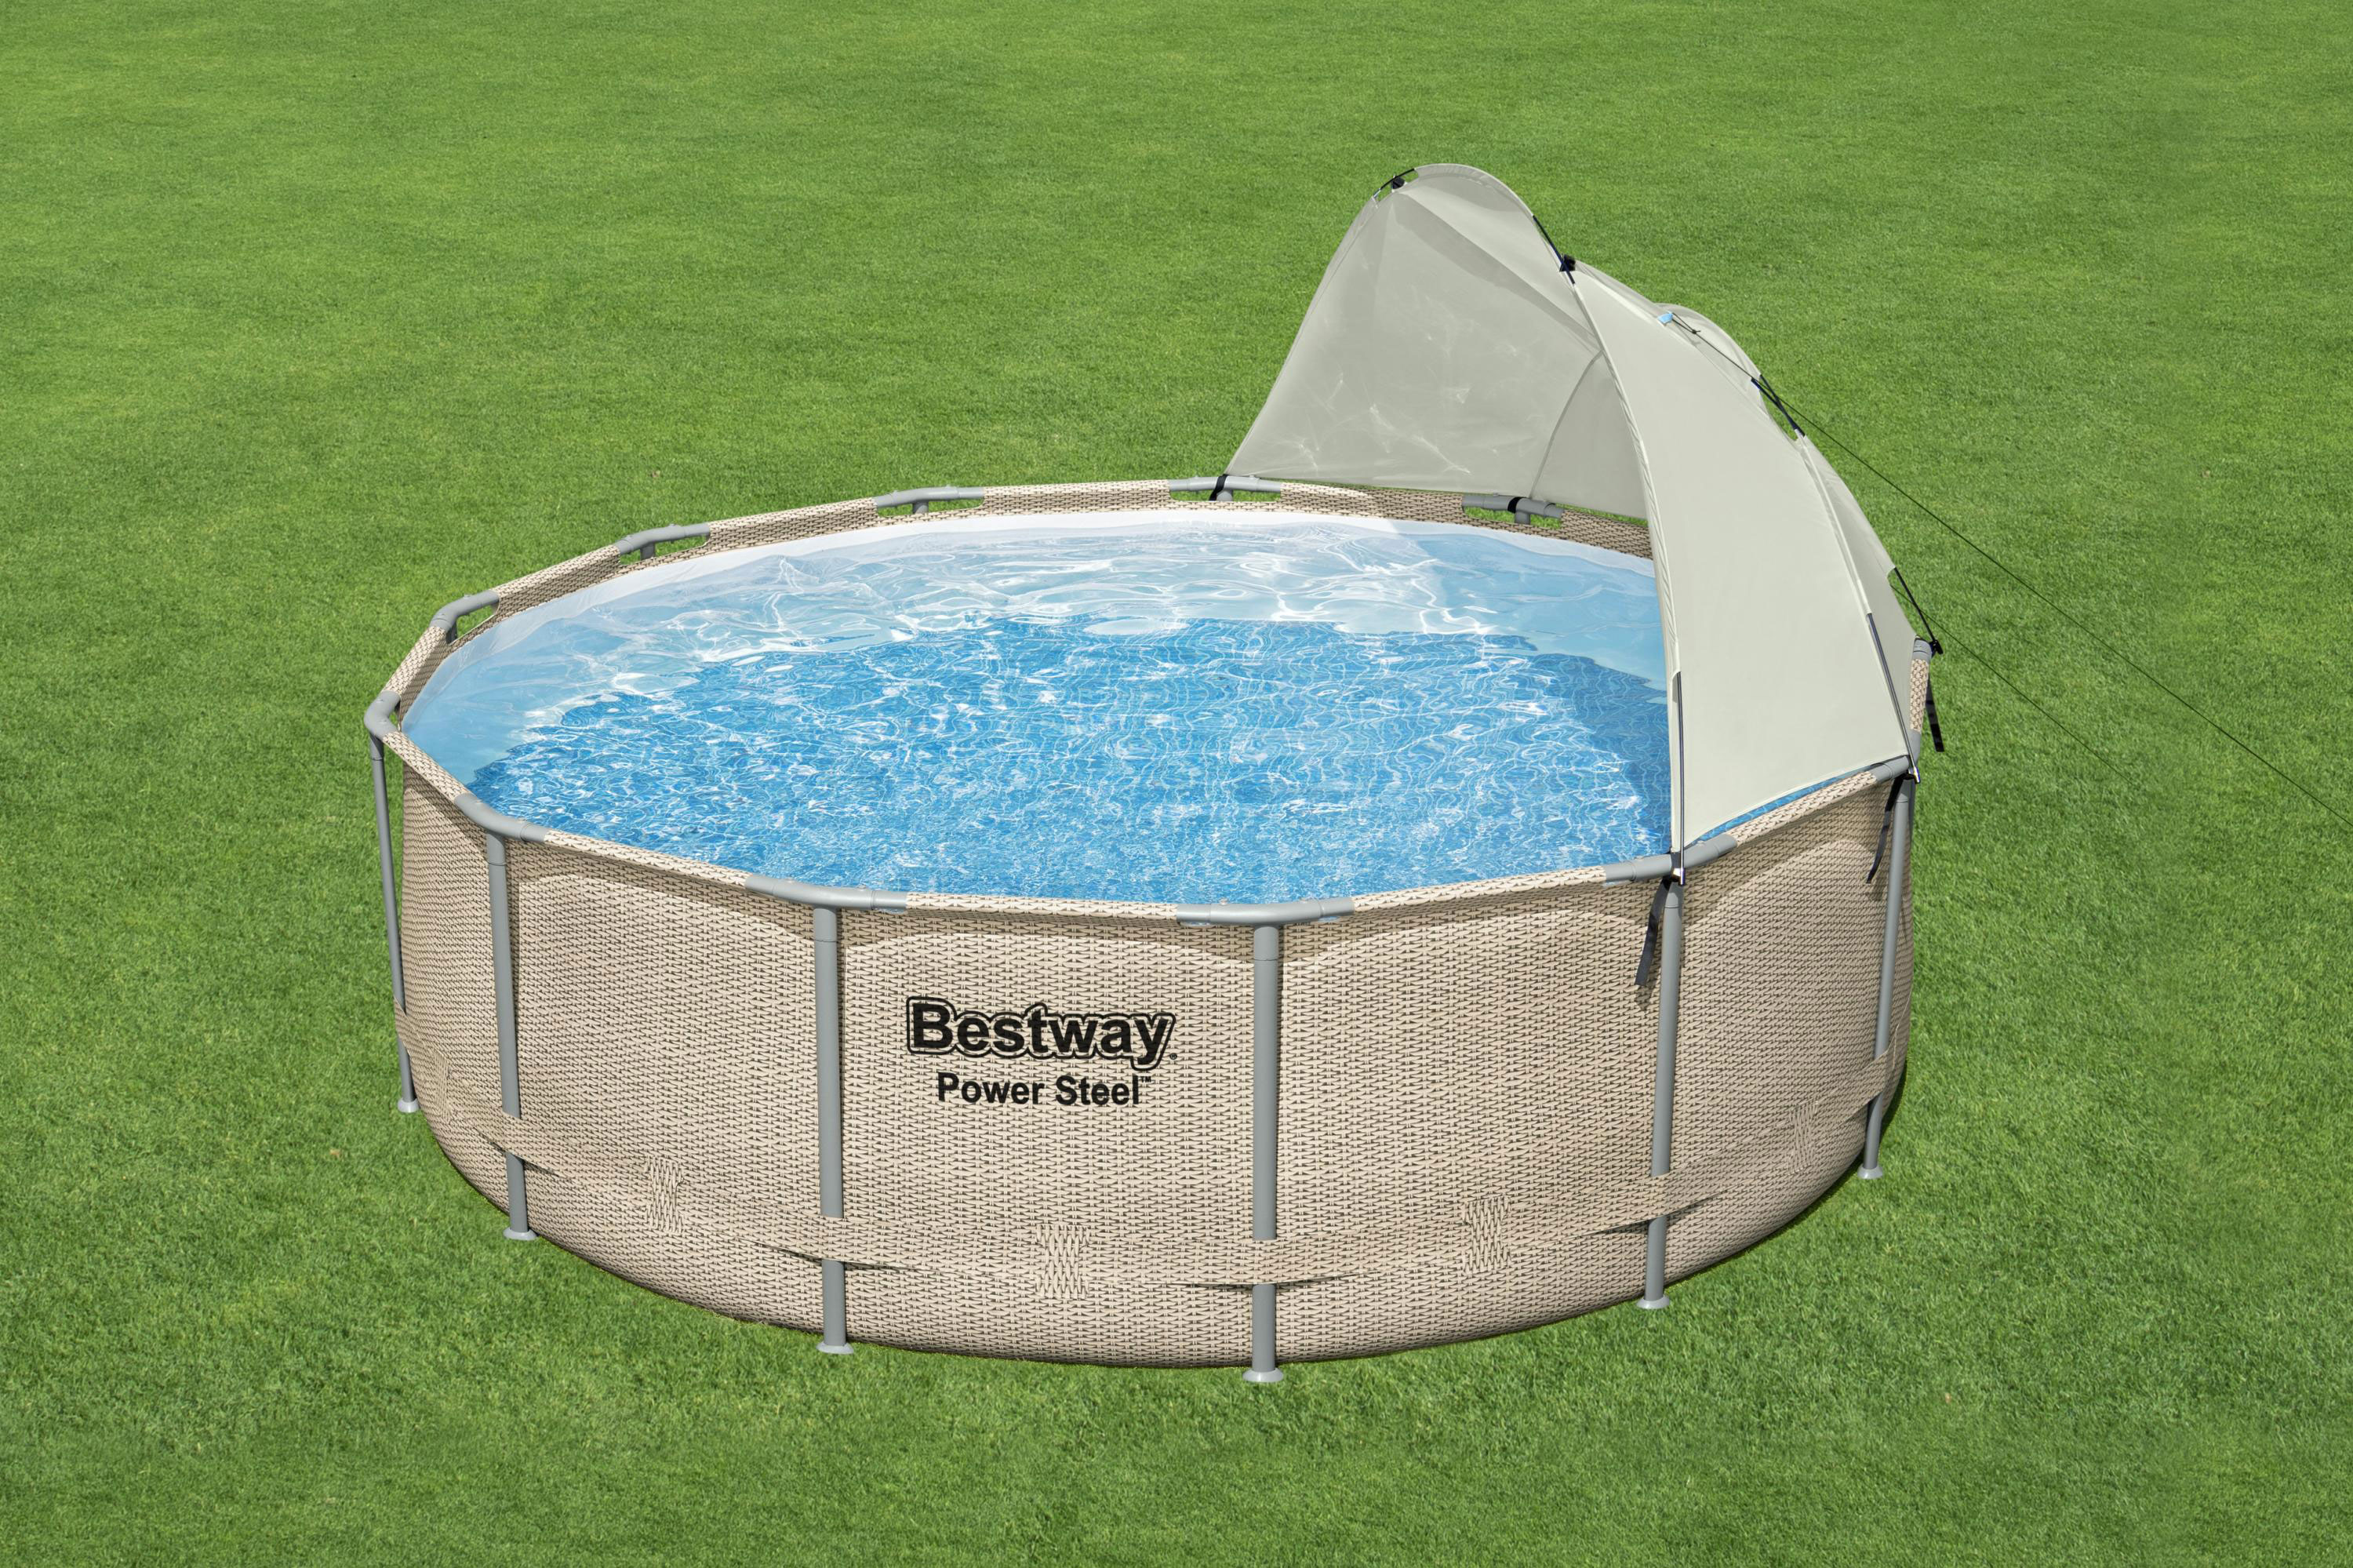 BESTWAY 58681 POOL CANOPY FOR 305-4+CM - ONLY THE ROOF COVER